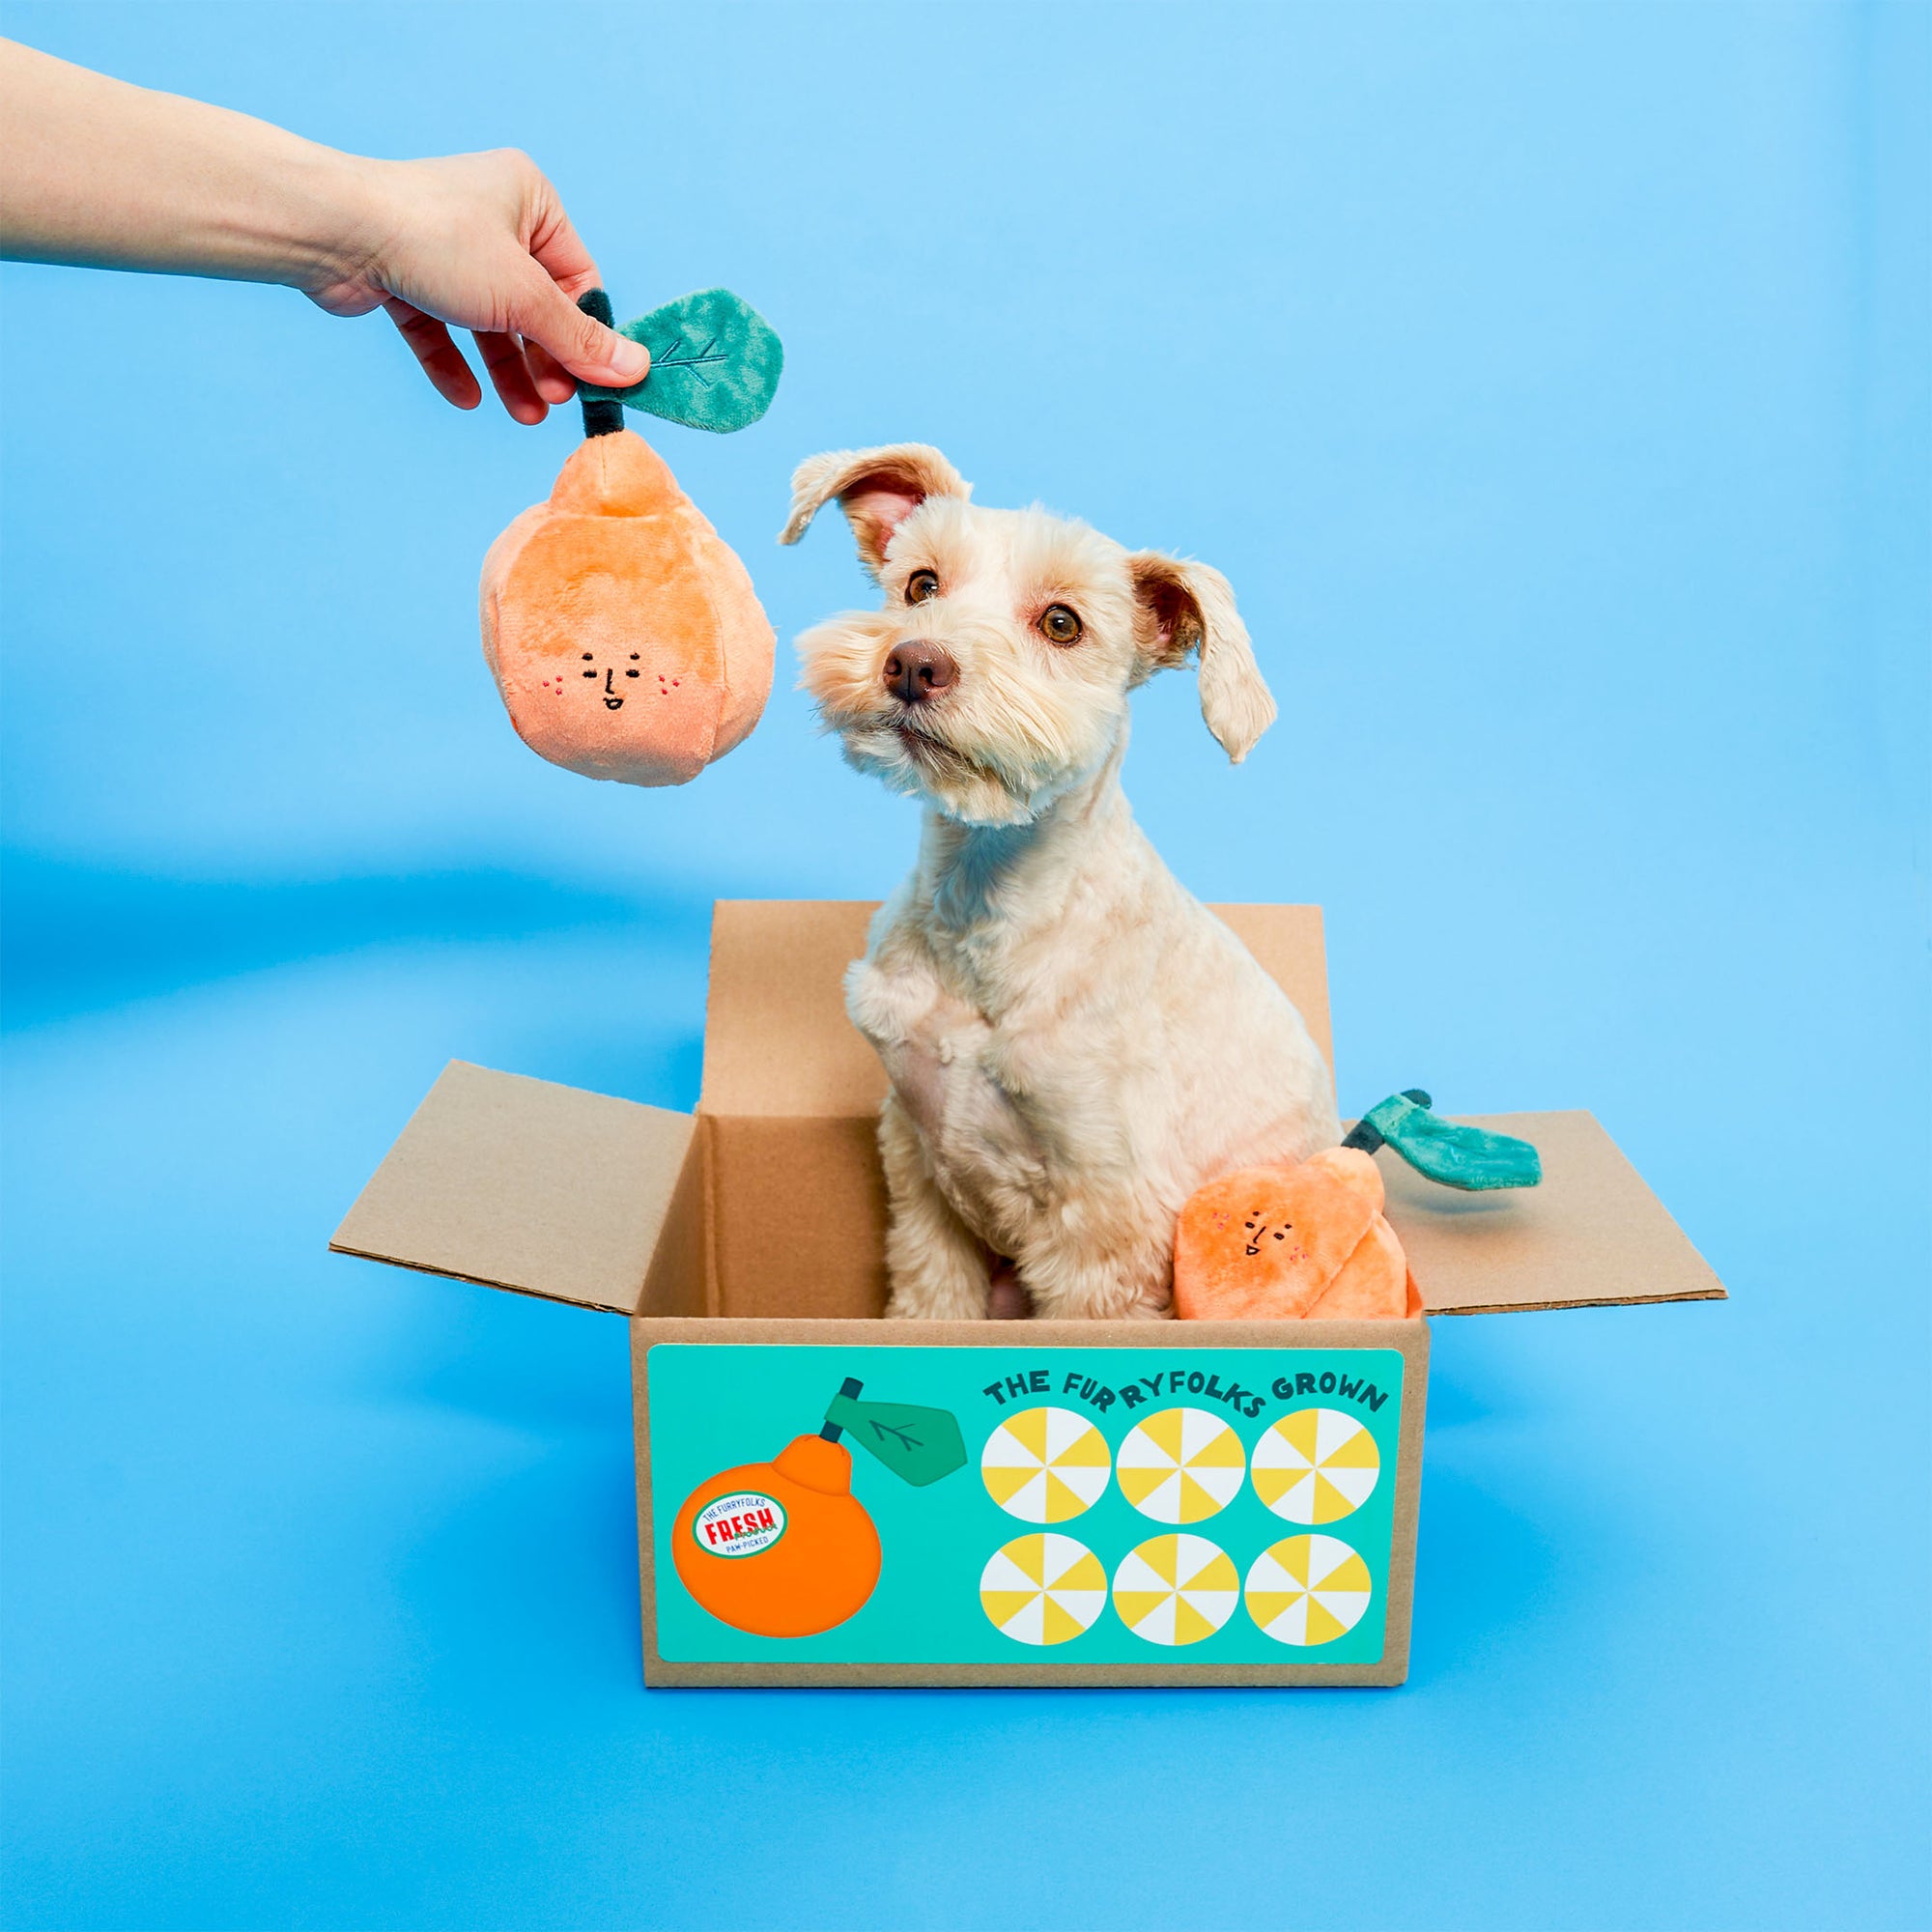 A light-colored dog with one ear perked up is looking attentively at an orange-shaped dog toy being held by a person’s hand. The dog is sitting in a cardboard box with a blue background, and beside it is a package labeled "The Furryfolks Grown".